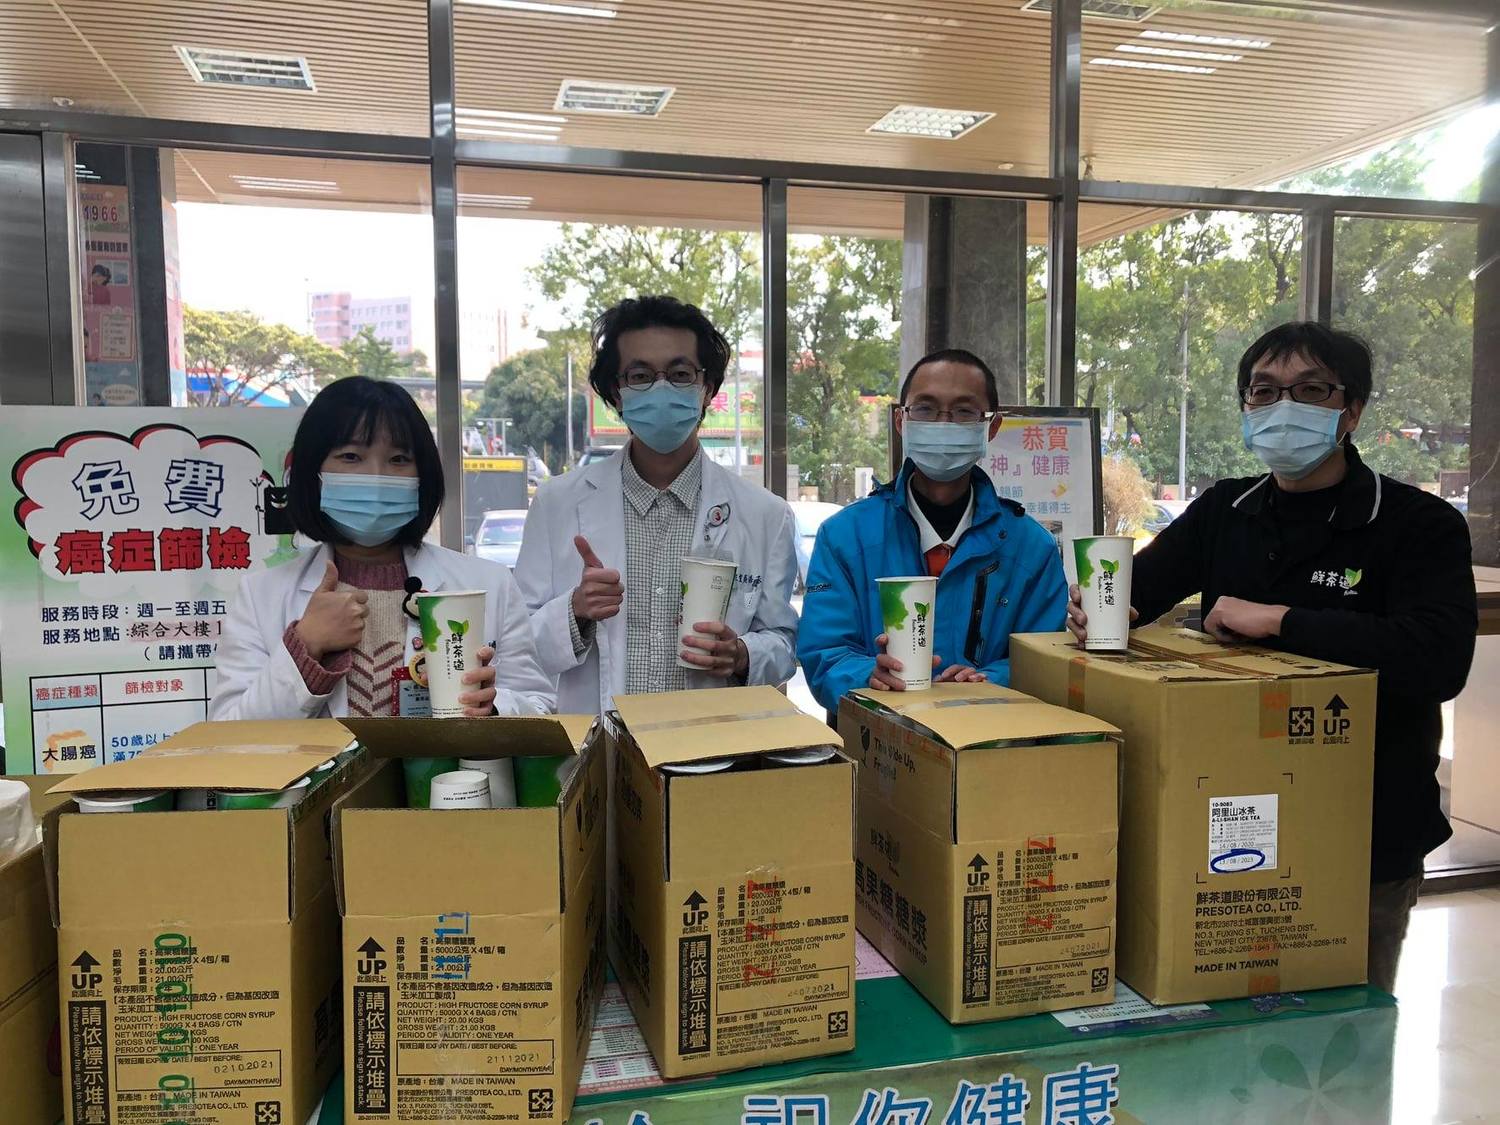 All of Taiwan supported medical care from Nanzhi to the north.  The Taoyuan Hospital of the National Department of Health and Welfare received 200 glasses of drinks from Ms. Chen of Tainan, saying that it was like seeing an oasis in the desert, full of hope Image: Retrieved from the Facebook page of the Ministry's Taoyuan Hospital of Education